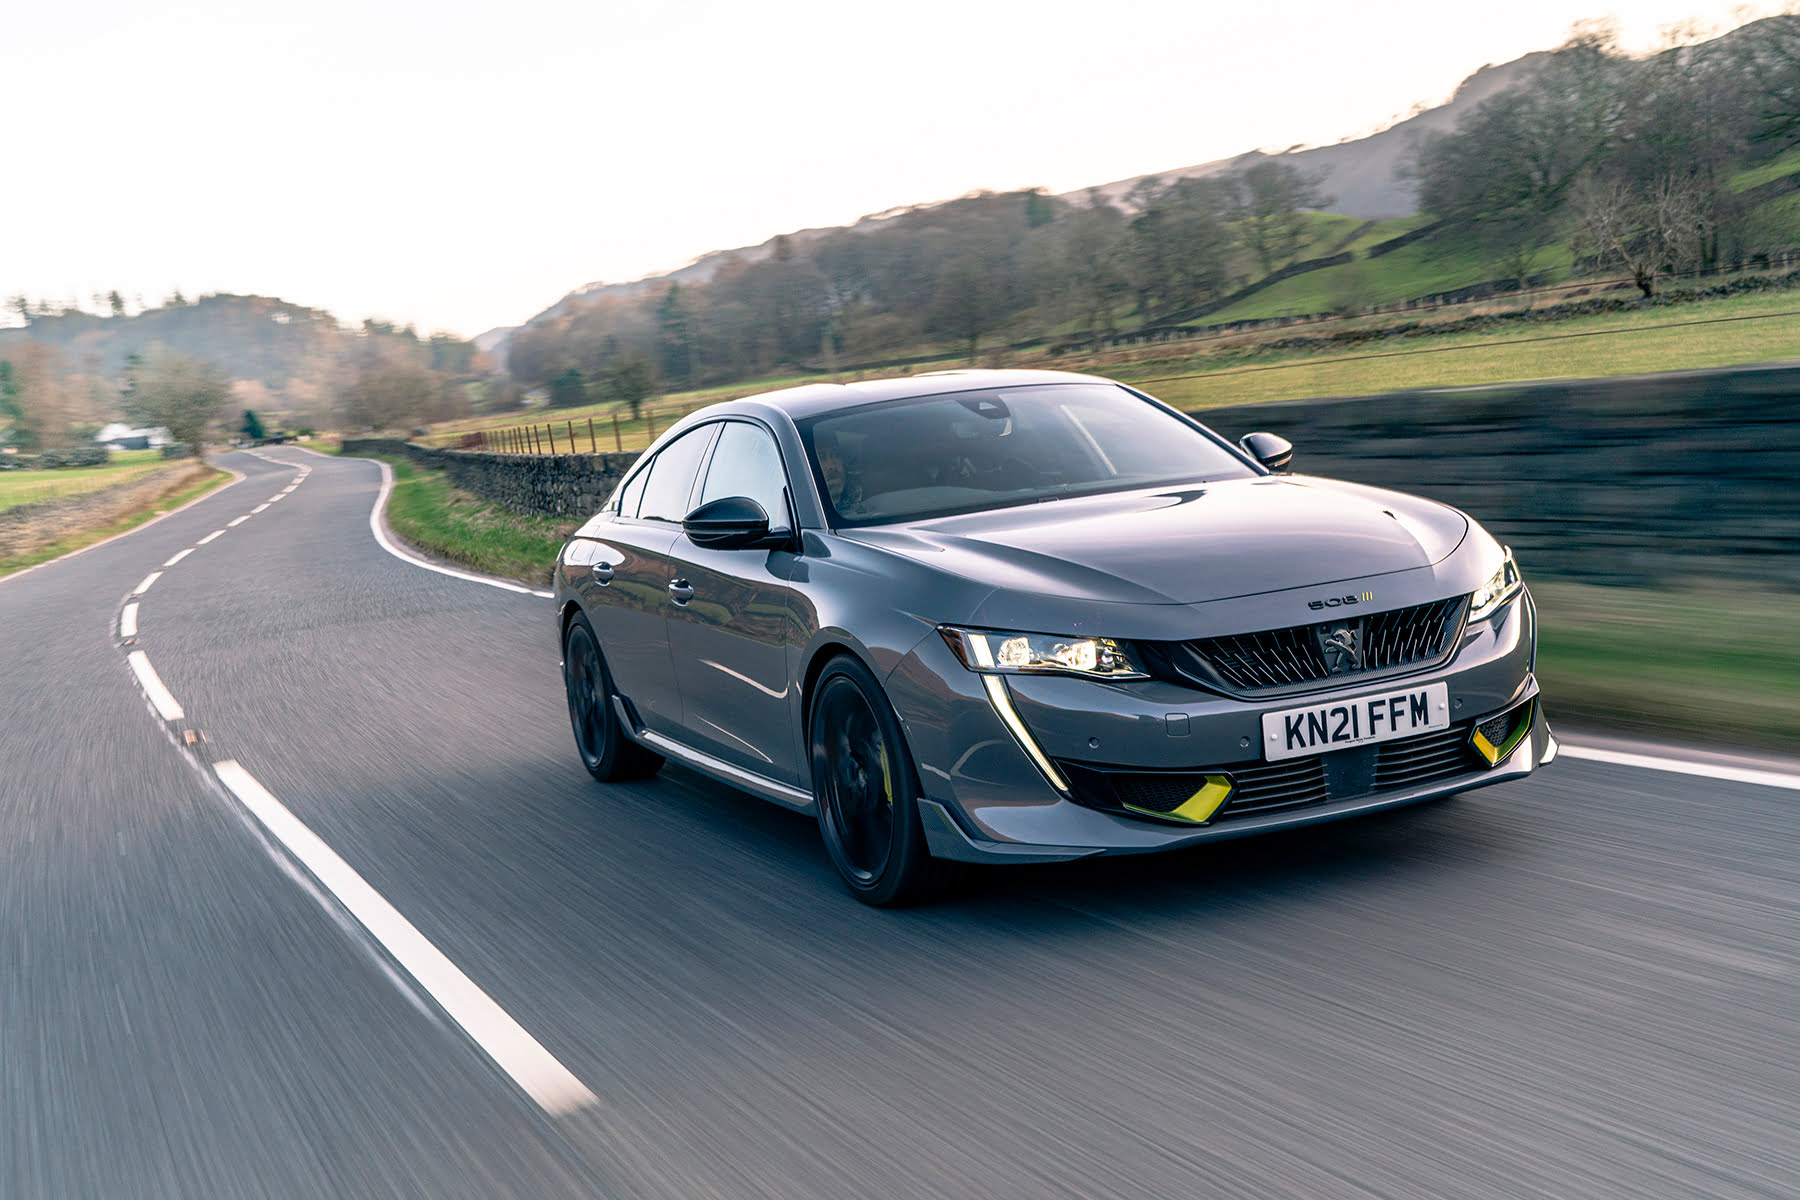 Peugeot 508 PSE front view | Expert Rating